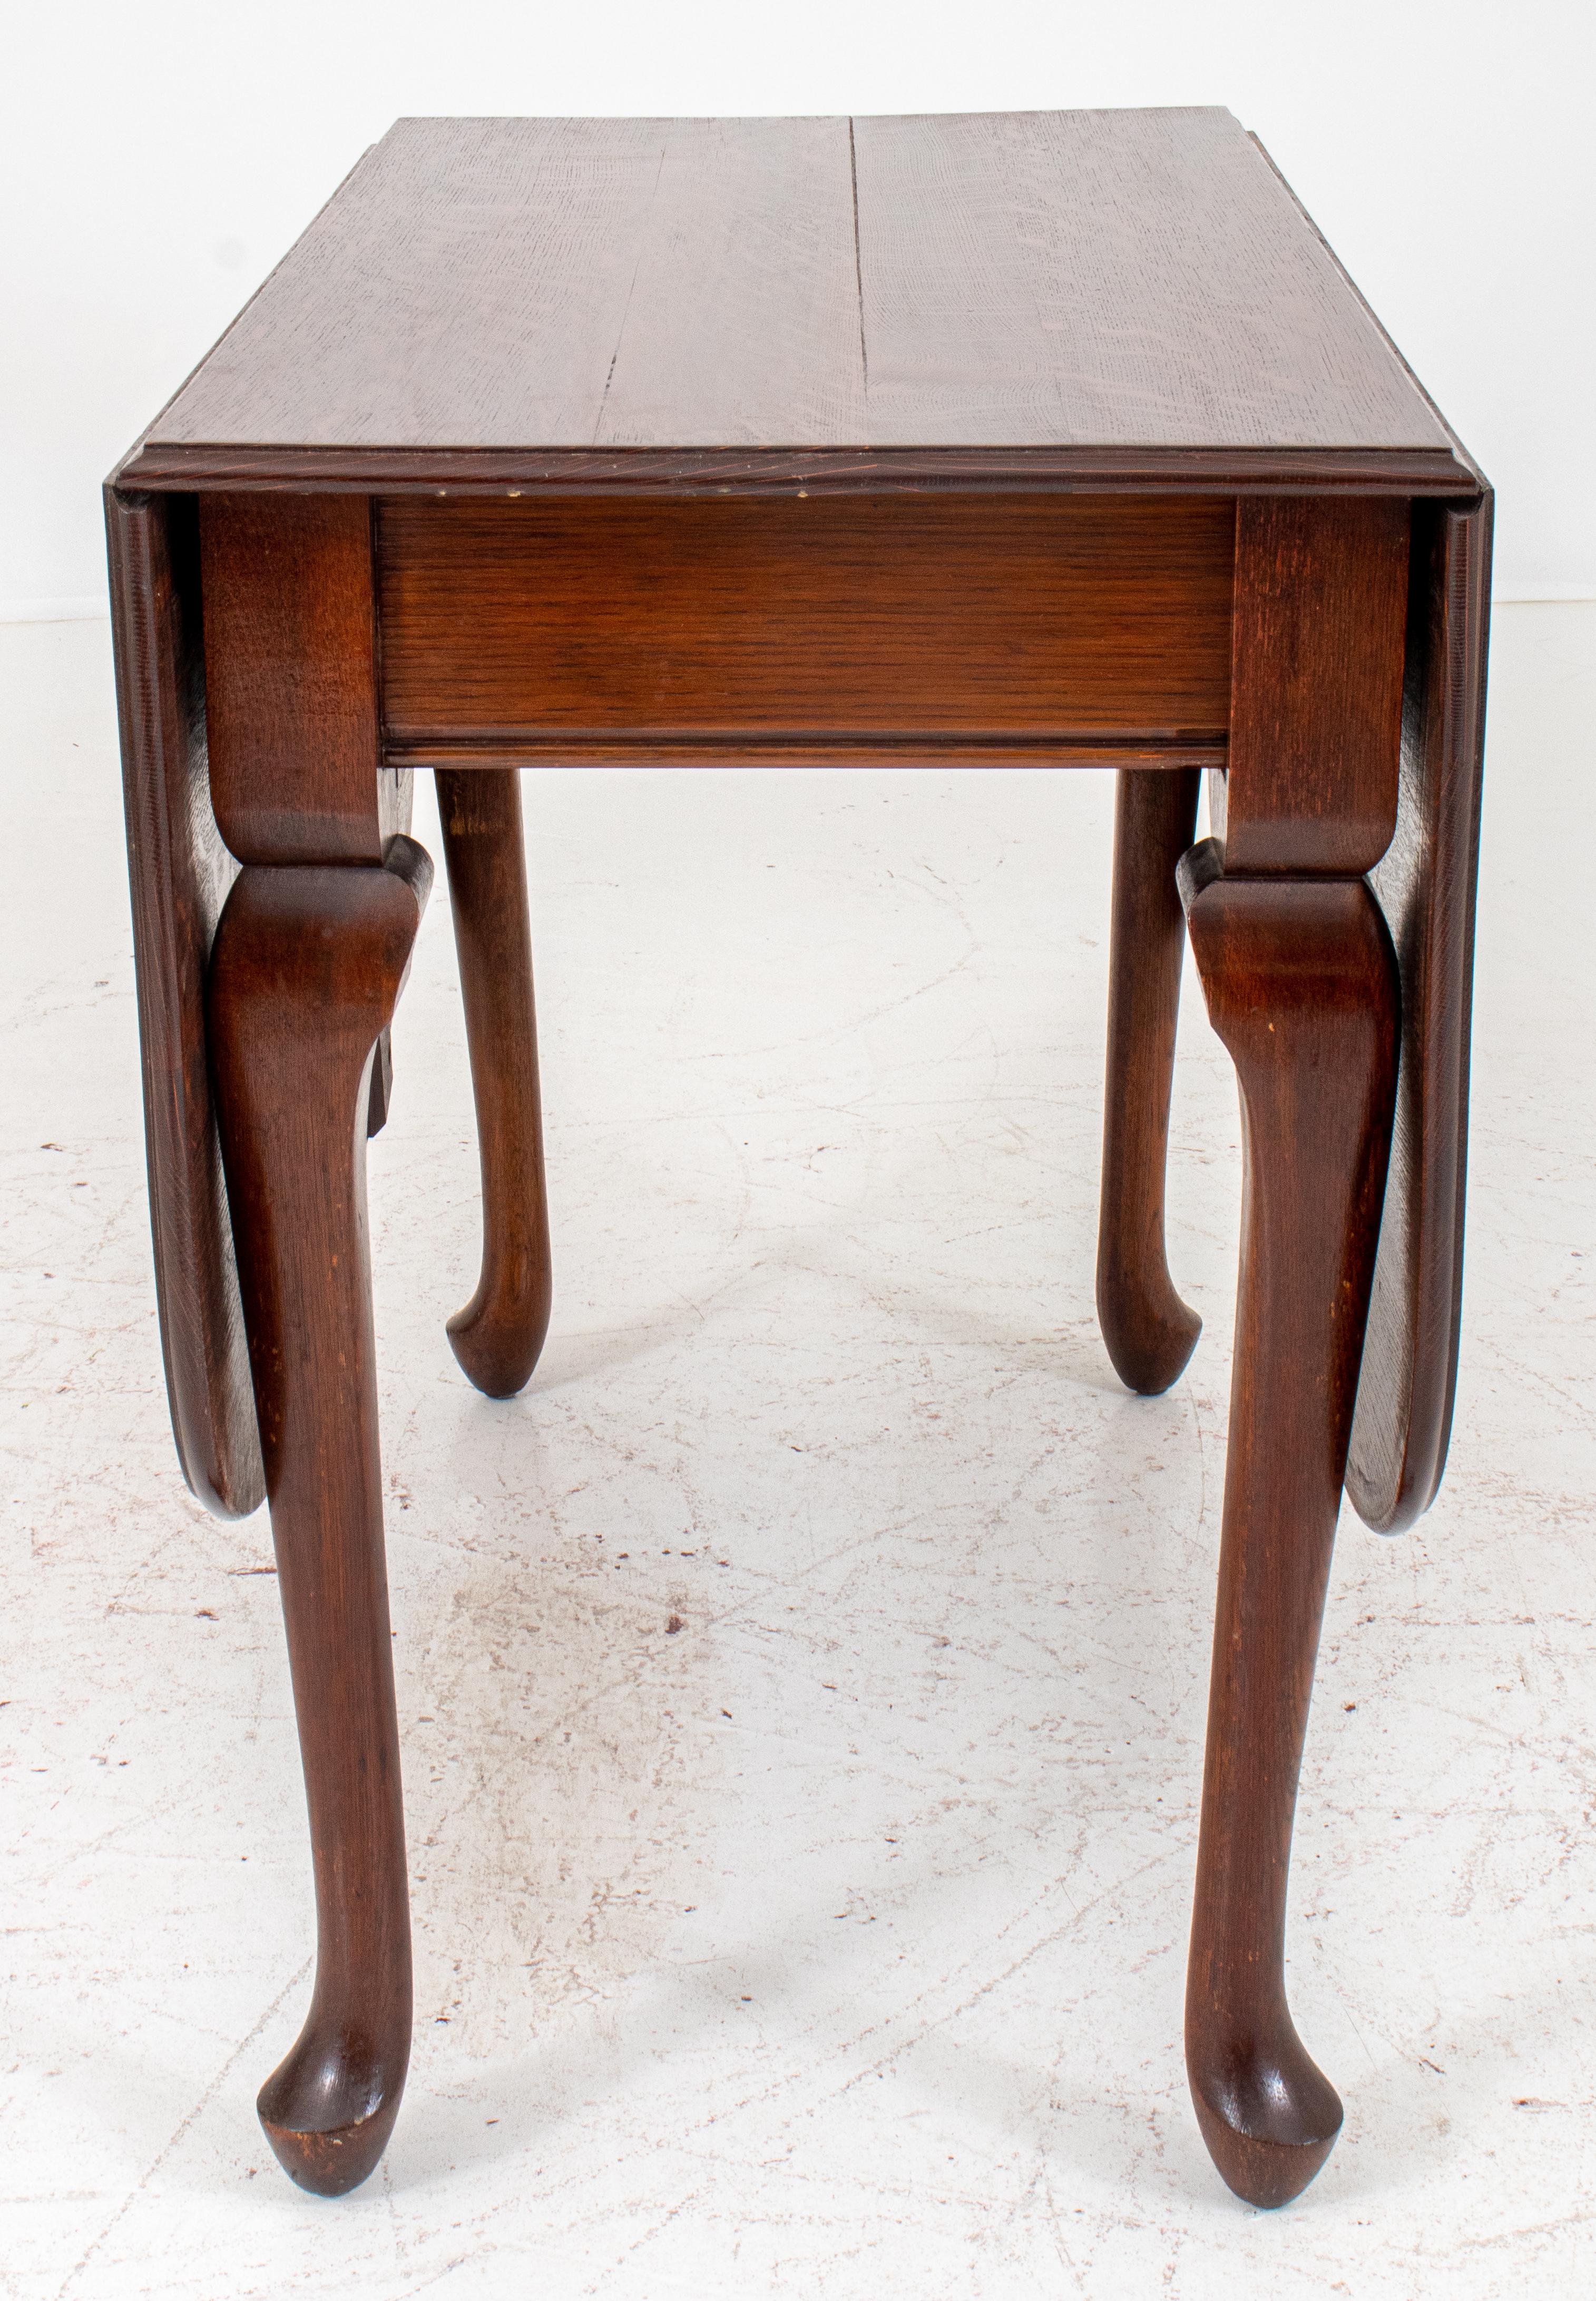 Queen Anne style quarter-sawn oak drop-leaf table, ca. 1890, rectangular, on cabriole legs terminating in pad feet. Measures: Closed: 30